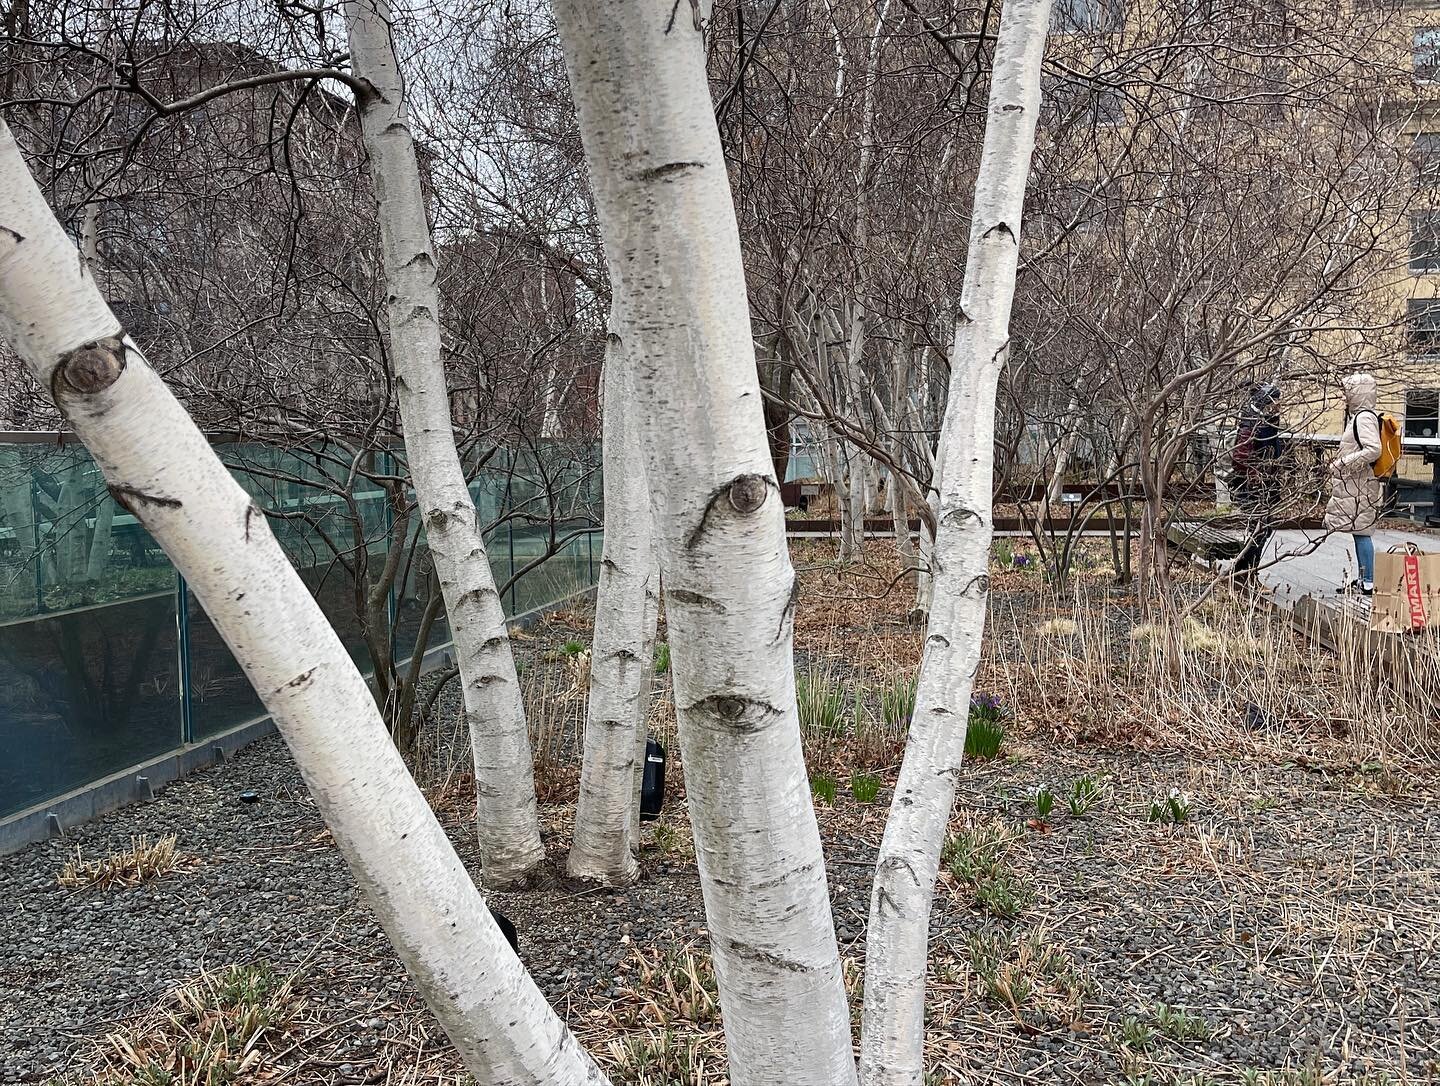 The eyes of birch and spring on the high line on the way to #whitneymuseum #whitneymuseumofamericanart . #nyc #chelseanyc #awp22